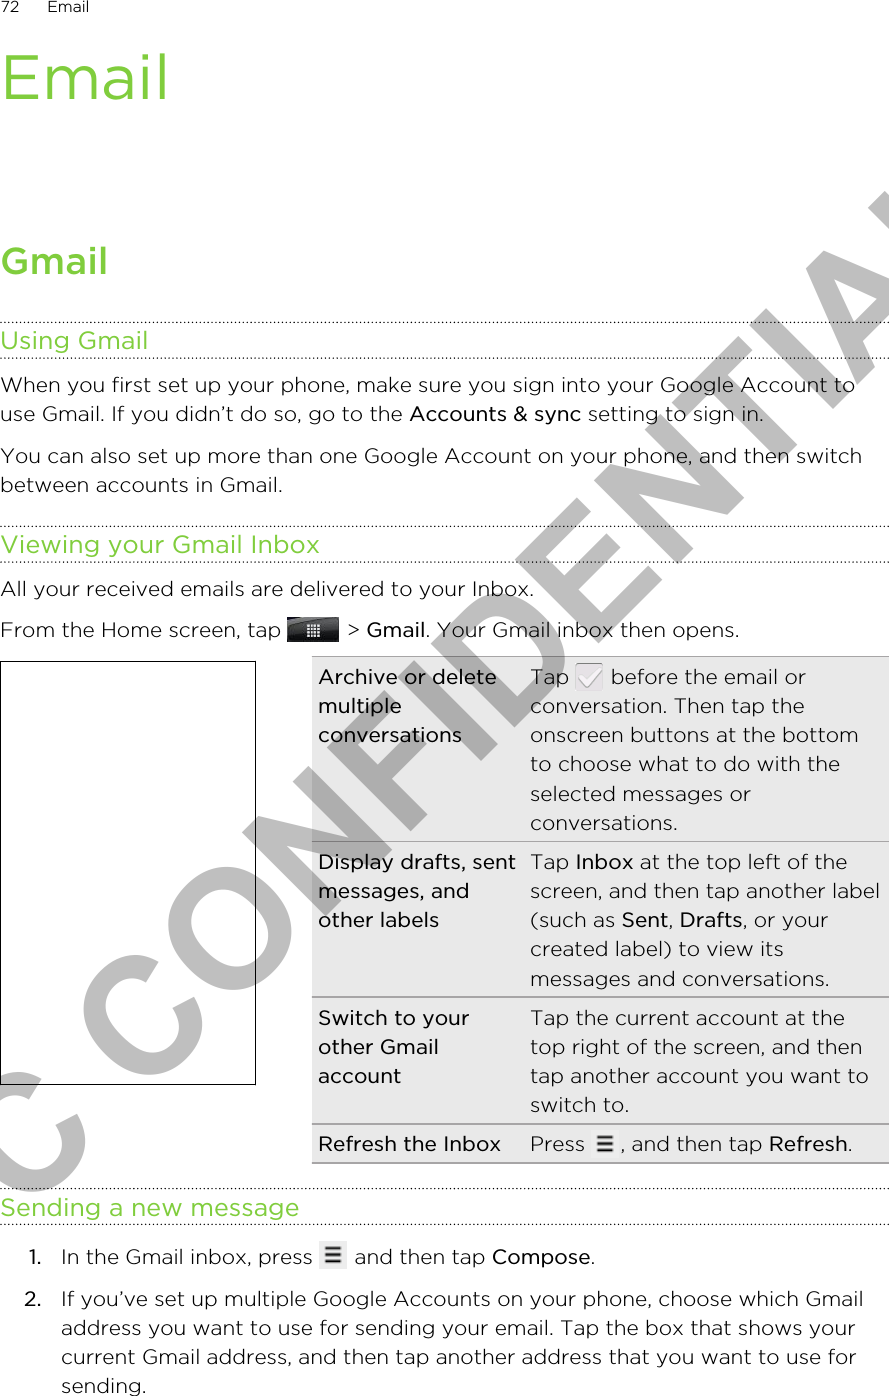 EmailGmailUsing GmailWhen you first set up your phone, make sure you sign into your Google Account touse Gmail. If you didn’t do so, go to the Accounts &amp; sync setting to sign in.You can also set up more than one Google Account on your phone, and then switchbetween accounts in Gmail.Viewing your Gmail InboxAll your received emails are delivered to your Inbox.From the Home screen, tap   &gt; Gmail. Your Gmail inbox then opens.Archive or deletemultipleconversationsTap   before the email orconversation. Then tap theonscreen buttons at the bottomto choose what to do with theselected messages orconversations.Display drafts, sentmessages, andother labelsTap Inbox at the top left of thescreen, and then tap another label(such as Sent, Drafts, or yourcreated label) to view itsmessages and conversations.Switch to yourother GmailaccountTap the current account at thetop right of the screen, and thentap another account you want toswitch to.Refresh the Inbox Press  , and then tap Refresh.Sending a new message1. In the Gmail inbox, press   and then tap Compose.2. If you’ve set up multiple Google Accounts on your phone, choose which Gmailaddress you want to use for sending your email. Tap the box that shows yourcurrent Gmail address, and then tap another address that you want to use forsending.72 EmailHTC CONFIDENTIAL